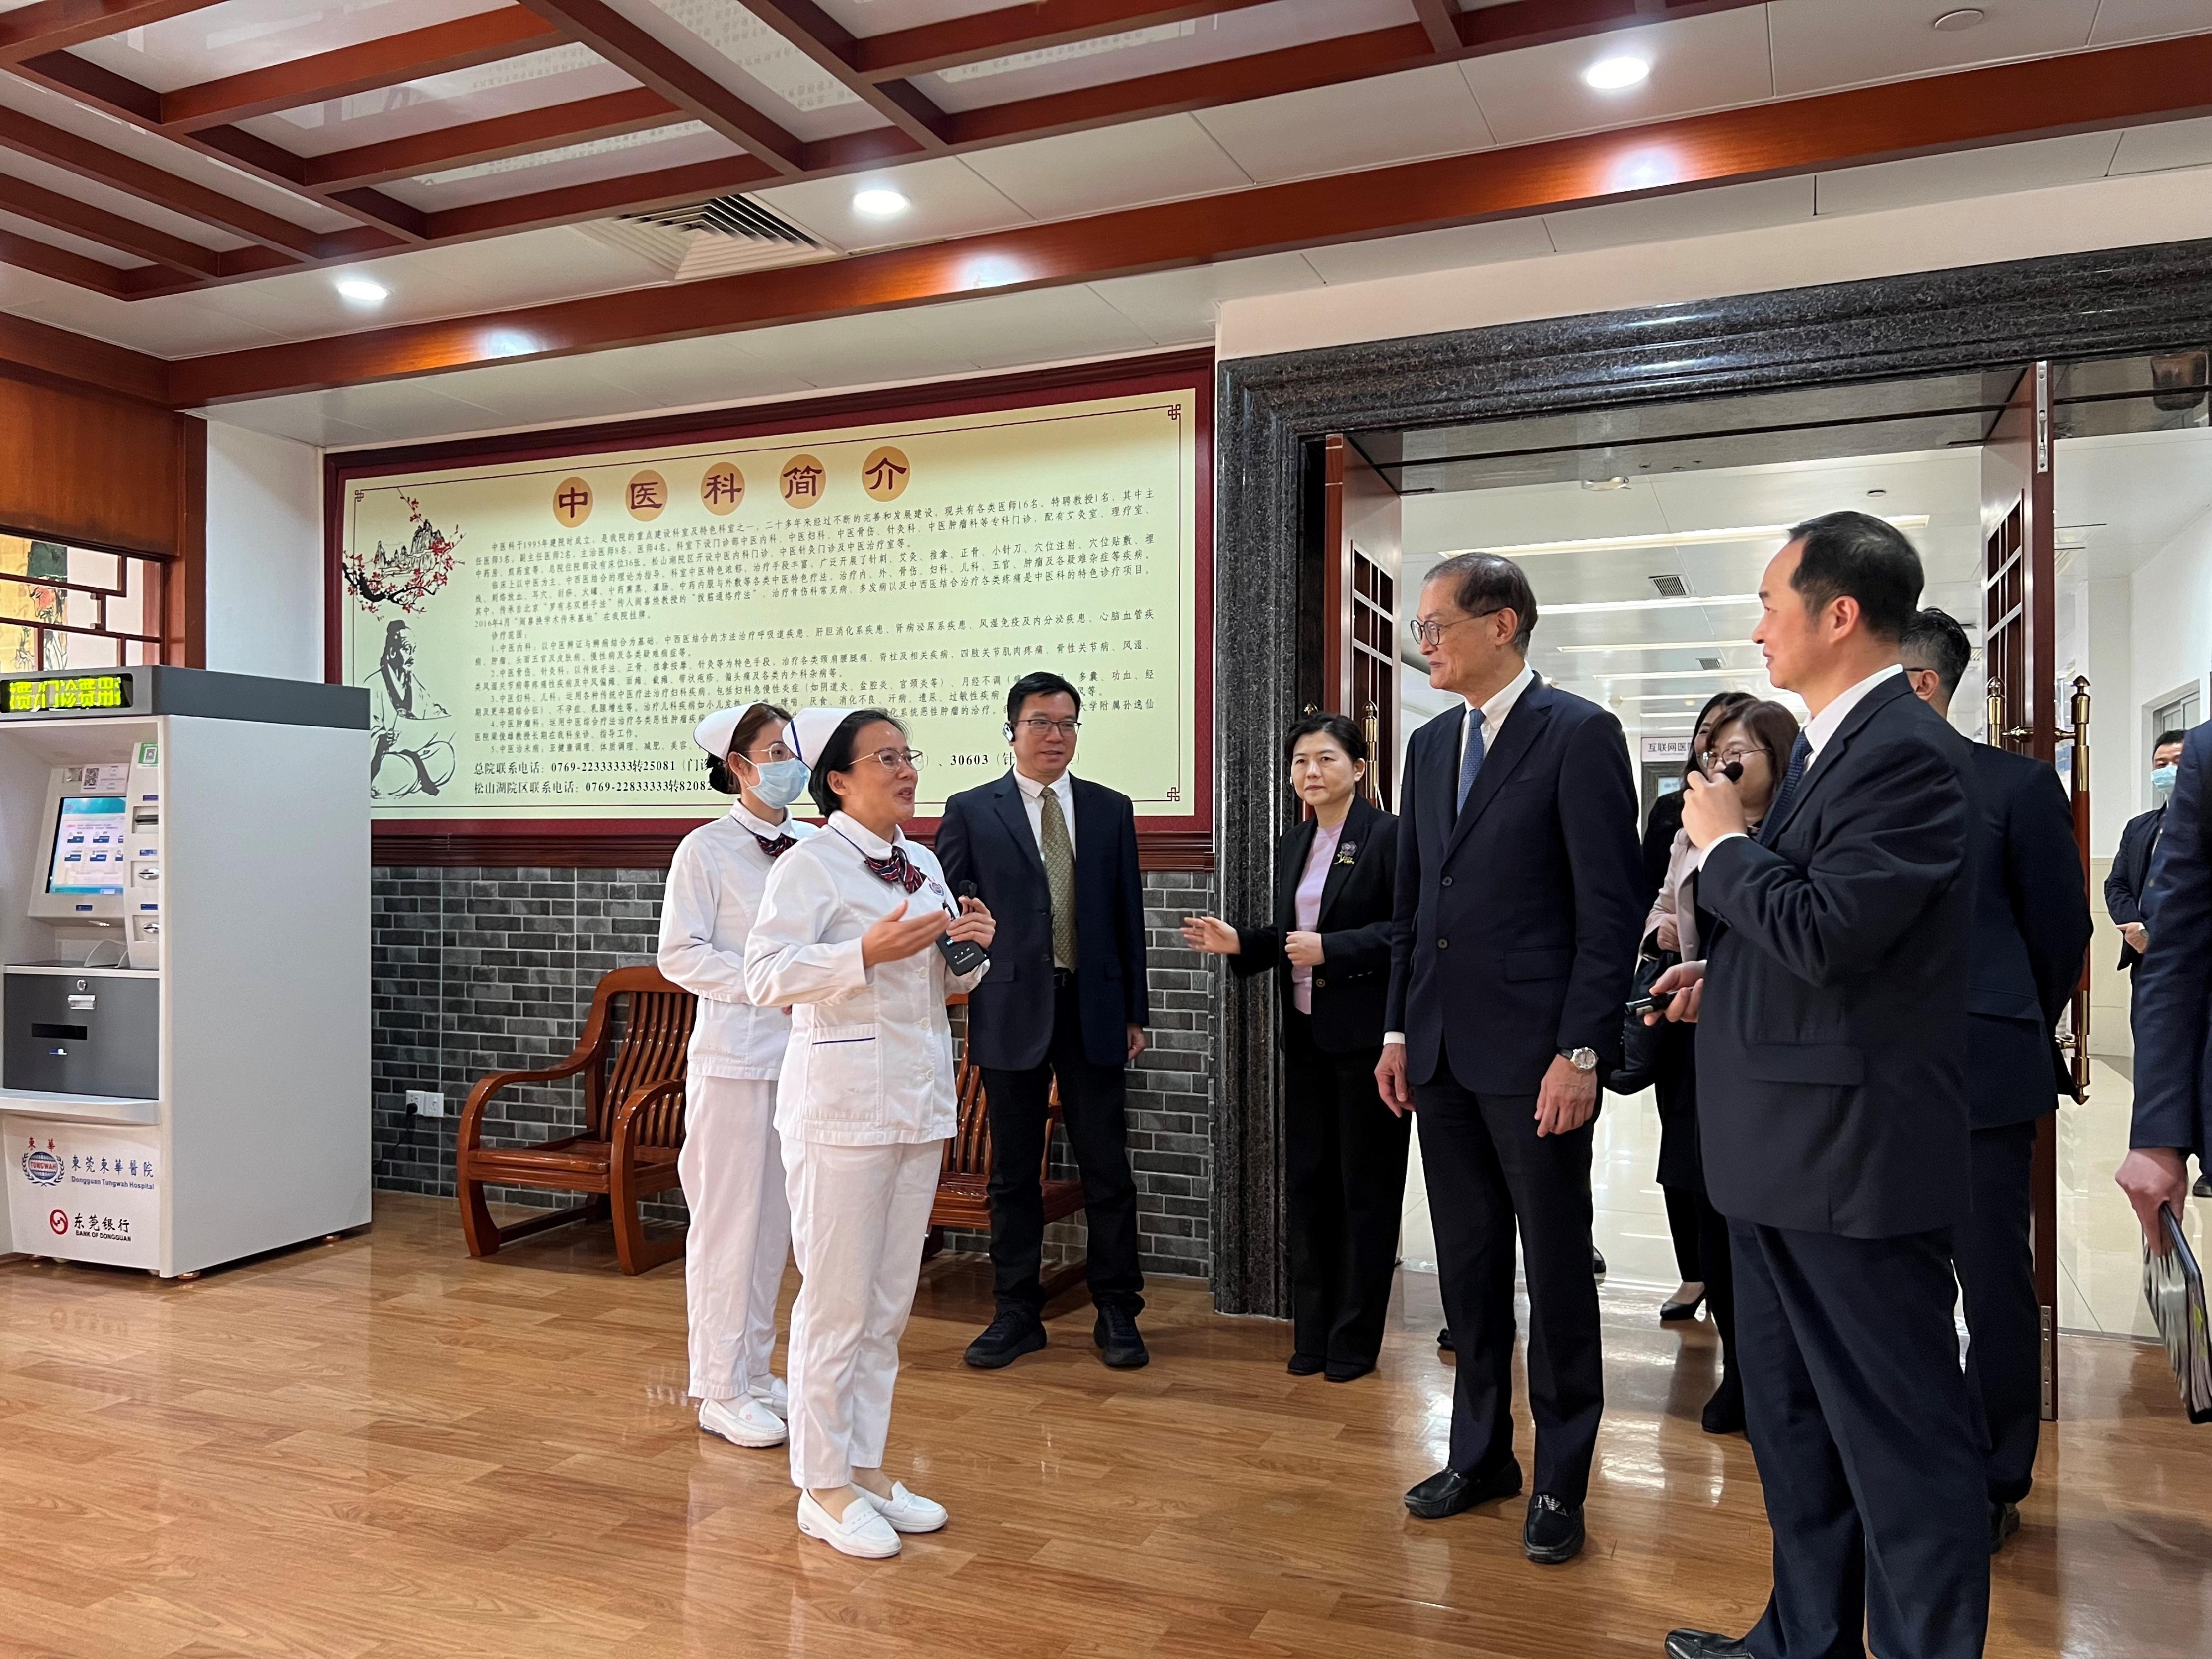 The Secretary for Health, Professor Lo Chung-mau, and his delegation visited the Dongguan Tungwah Hospital in Dongguan today (March 14). Photo shows Professor Lo (second right) receiving a briefing by a staff member on the Chinese medicine services of the hospital.